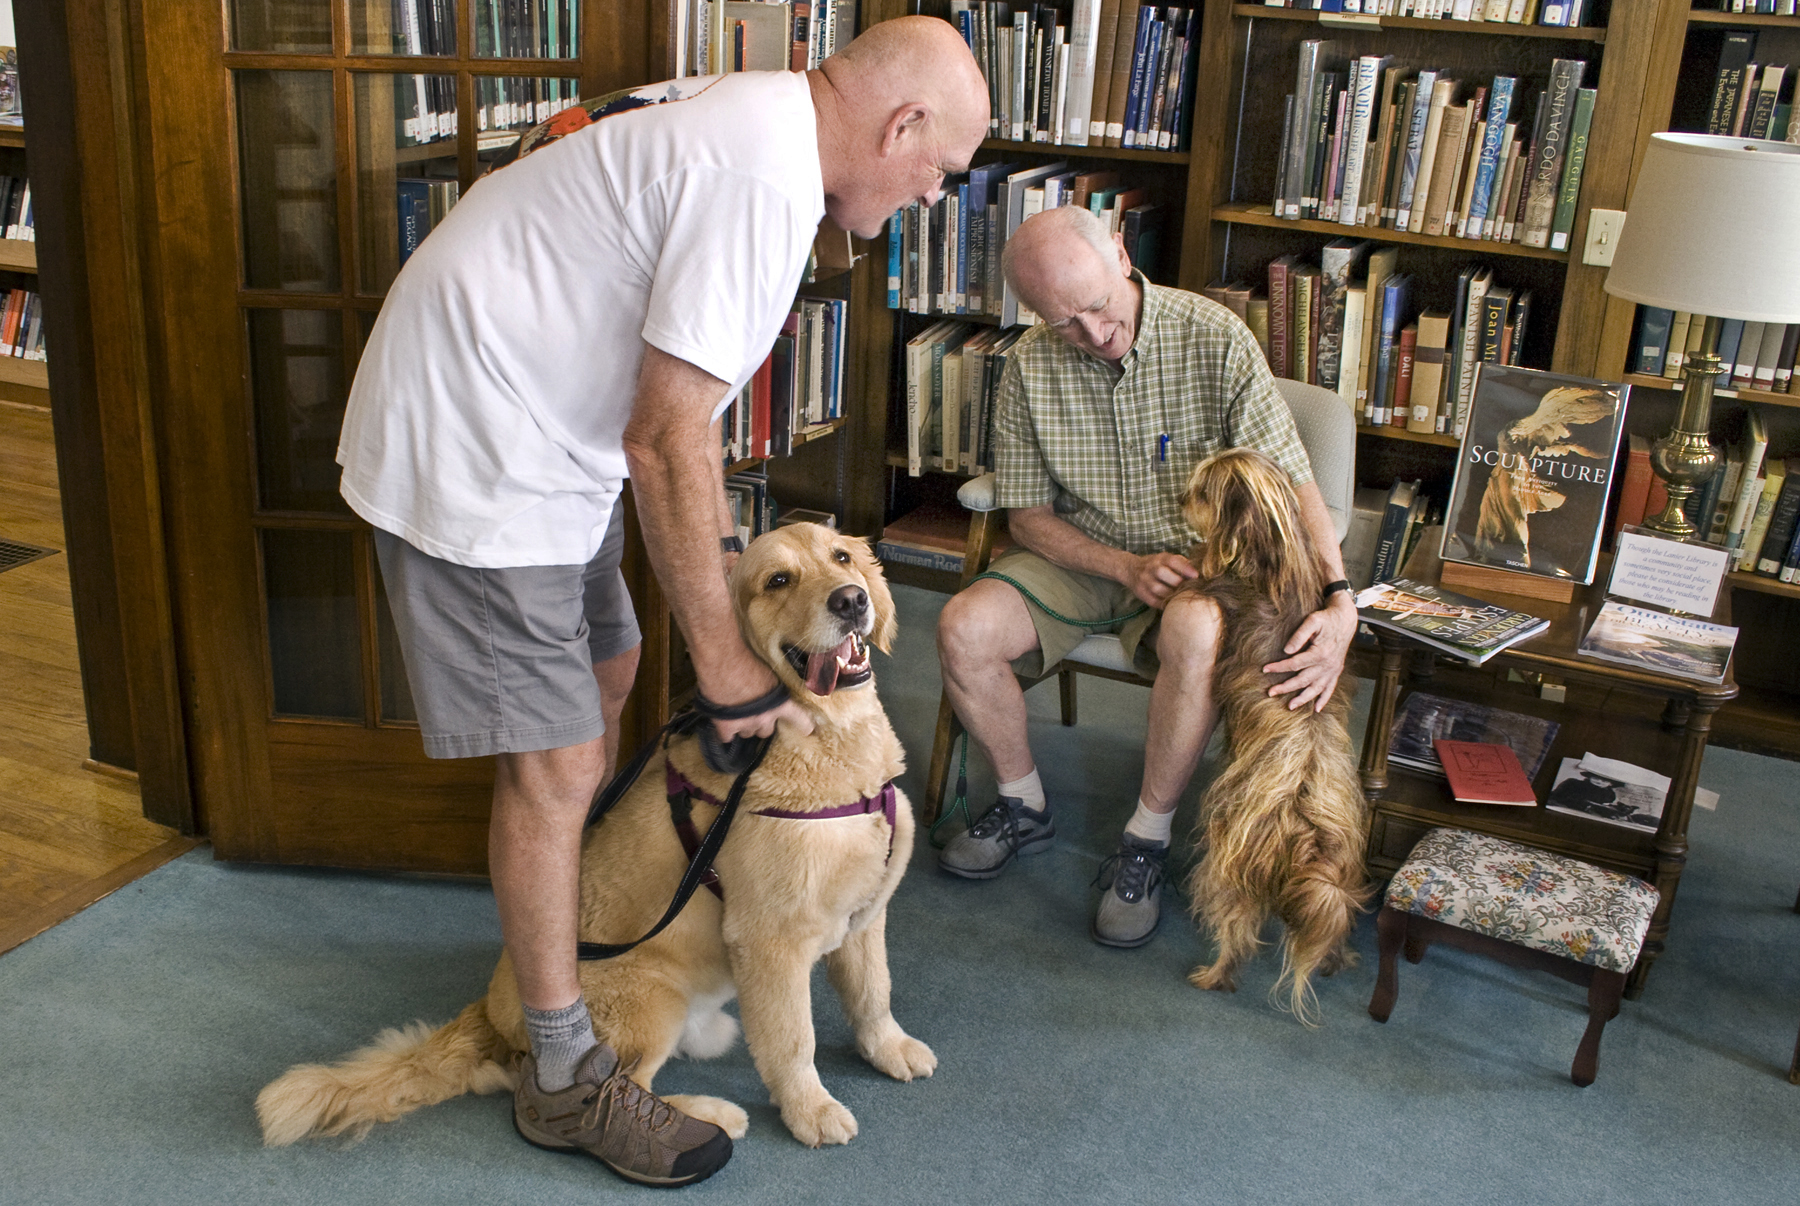 Lanier Library Tryon NC Dogs in library